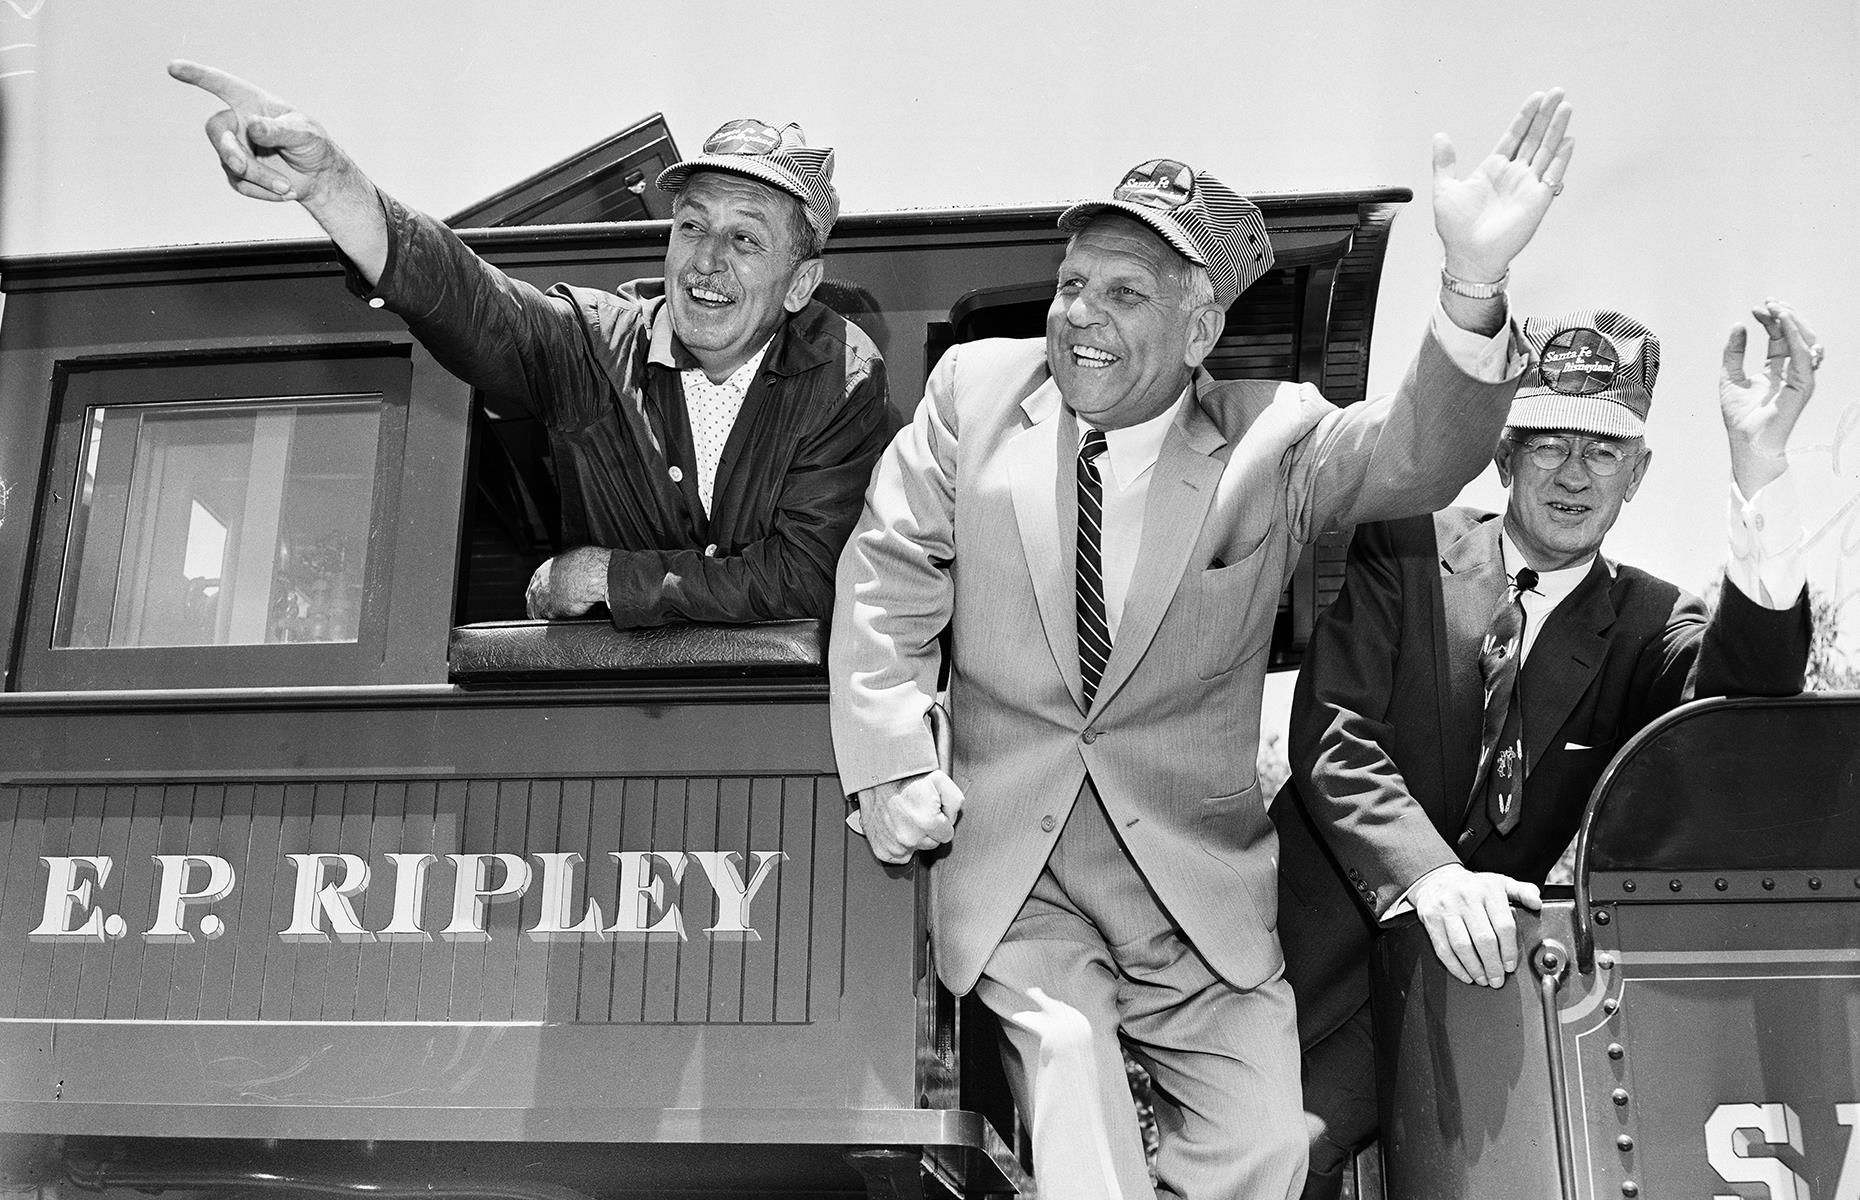 Slide 7 of 38: On the opening day, Walt Disney could hardly contain his joy as he showed California dignitaries around the park. He's snapped here riding the beloved Disney steam locomotive E. P. Ripley, as he gleefully points out the sights to then-state governor Goodwin Knight (pictured middle).